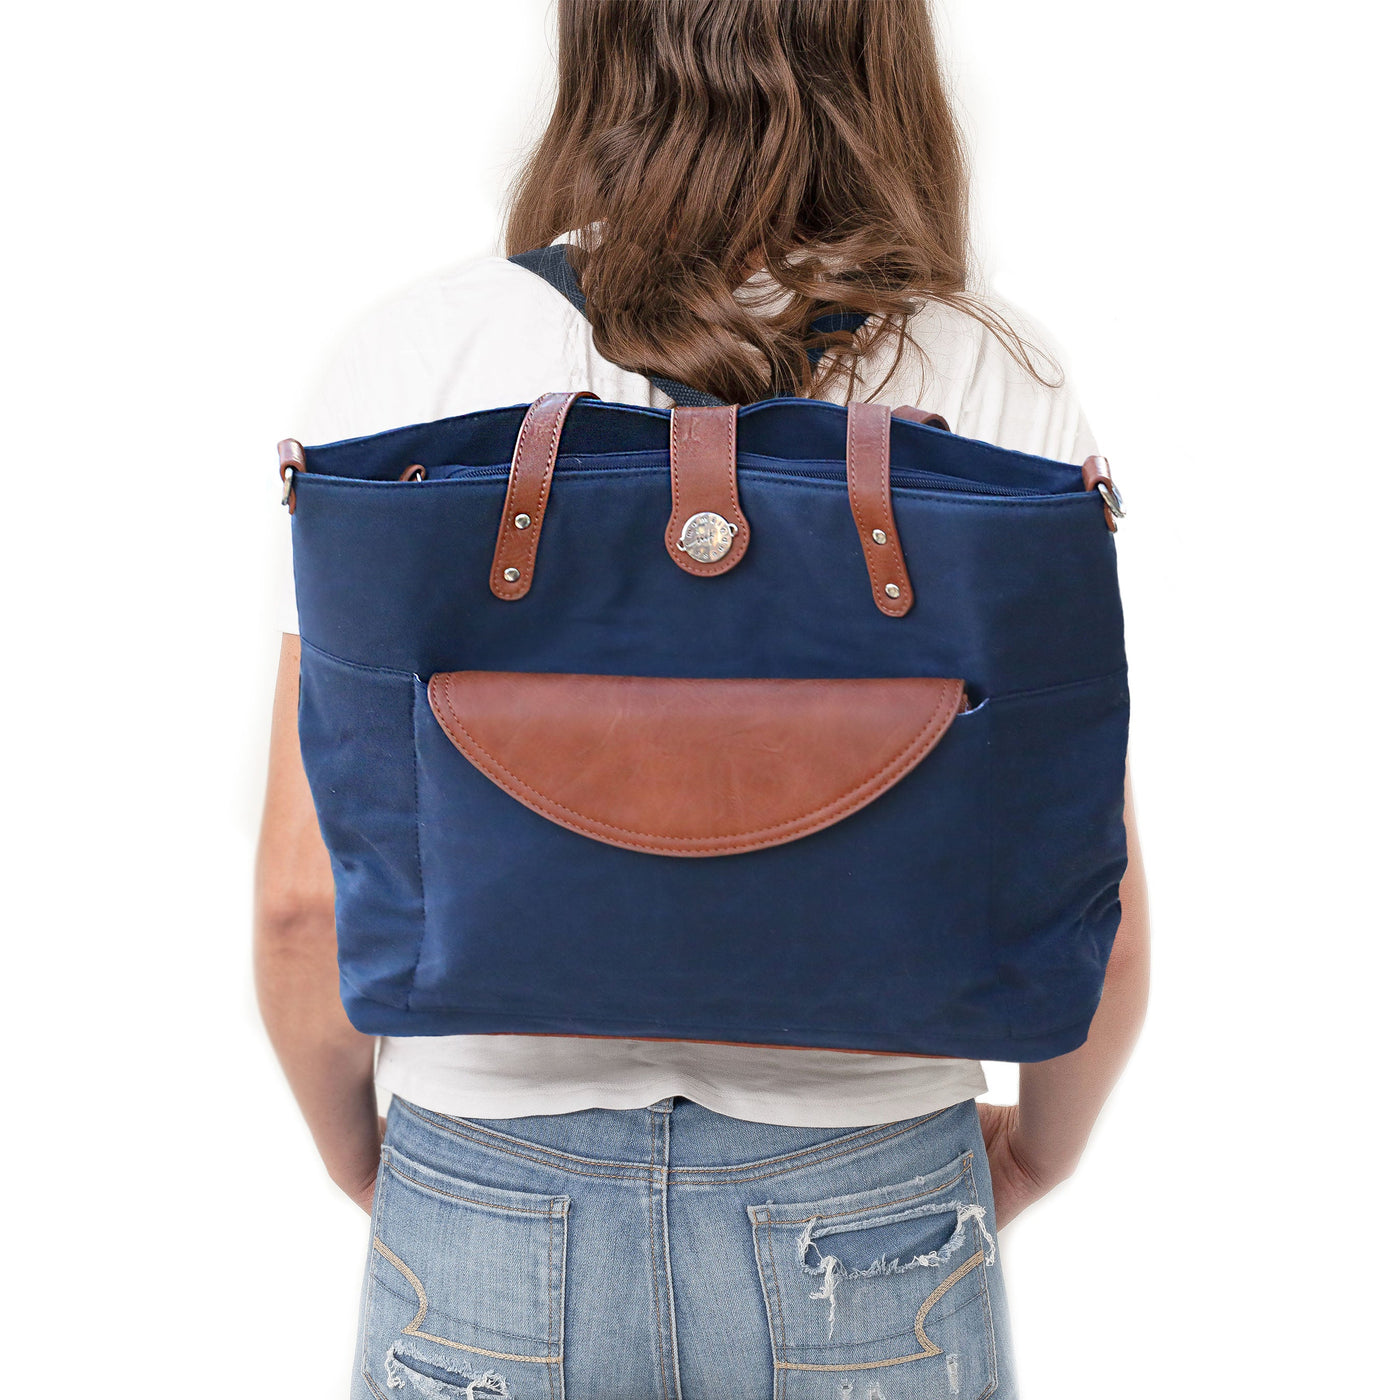 Mom in jeans and white t-shirt standing backwards wearing a navy blue waxed canvas tote bag as a backpack with brown vegan leather accents, all on a white background. 